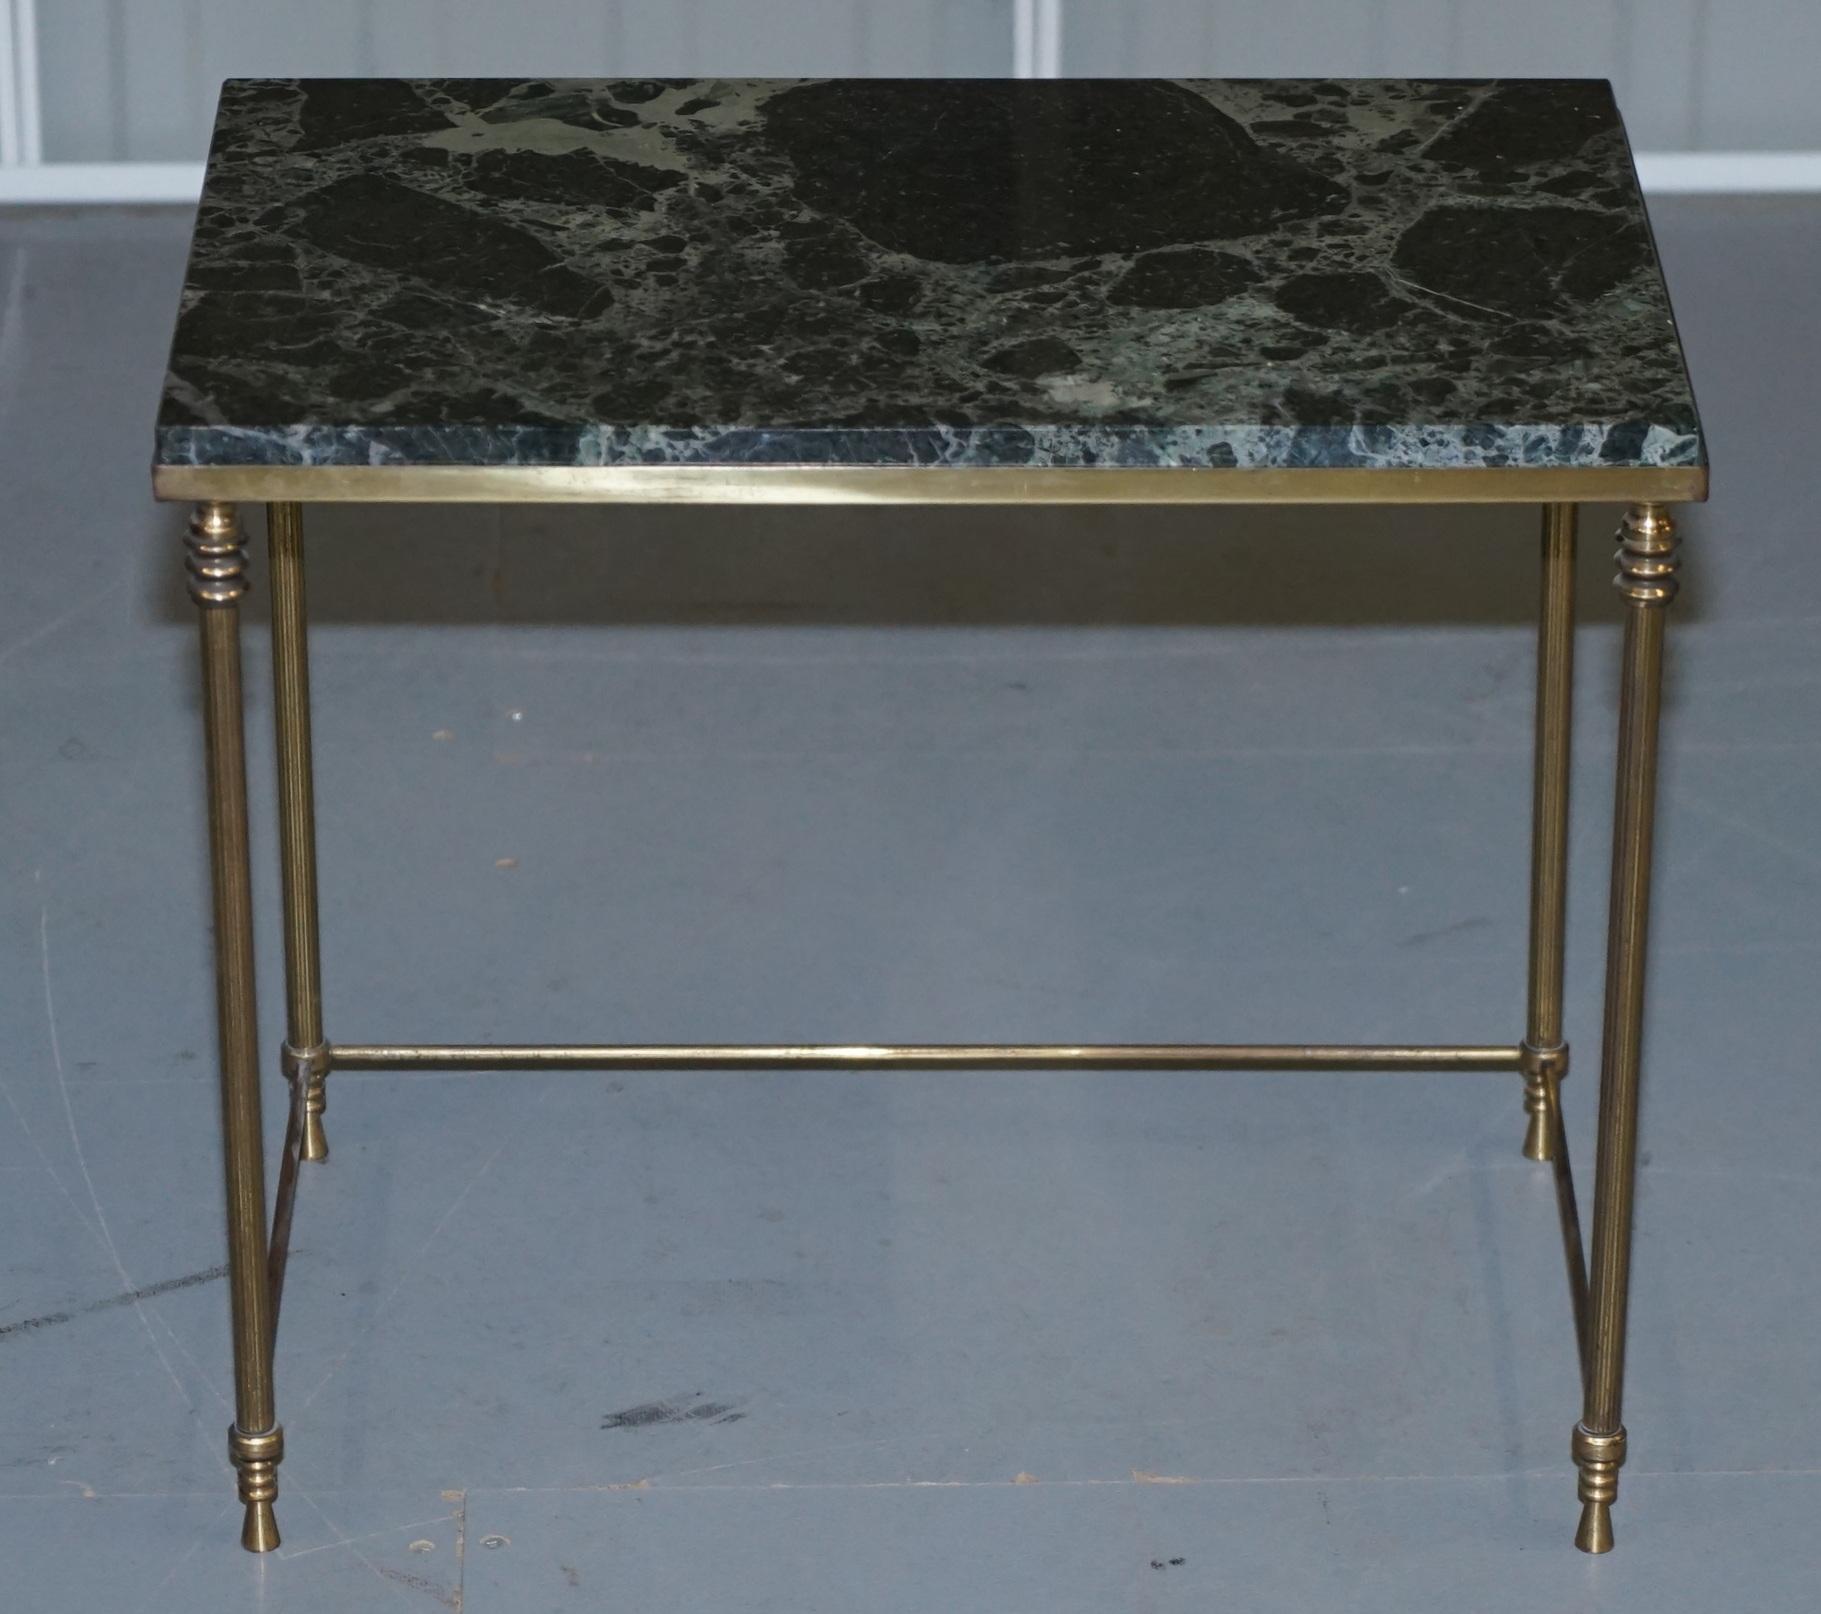 Hand-Crafted Vintage Italian Nest of Three Tables circa 1940s Brass with Thick Marble Top